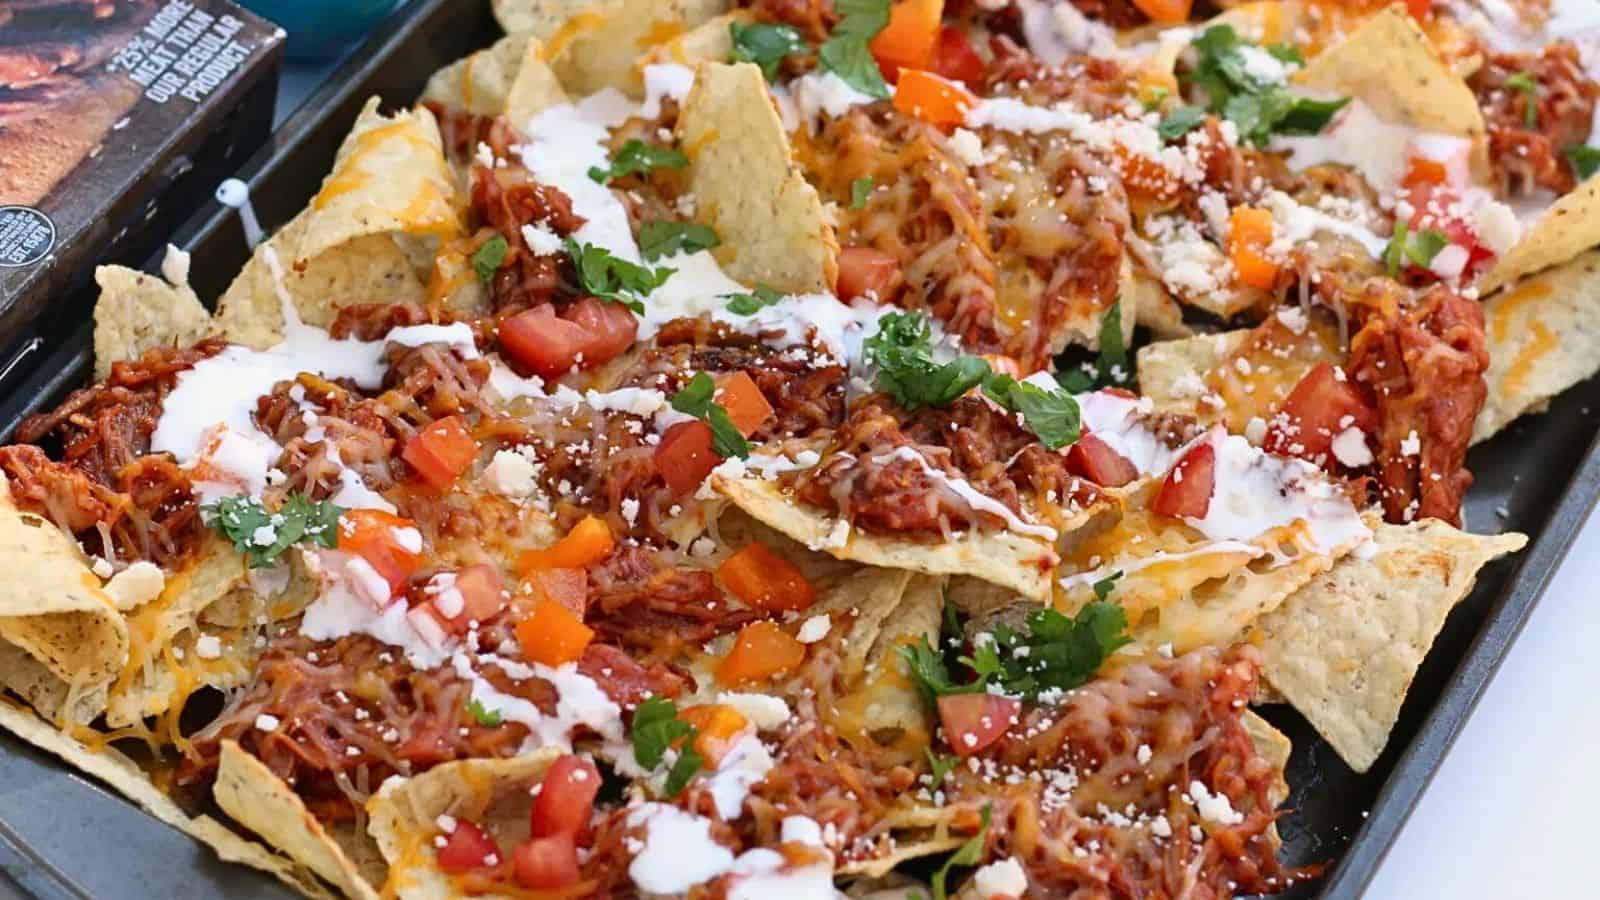 Sheet pan of nachos - topped with pulled pork, cheese, veggies, etc.